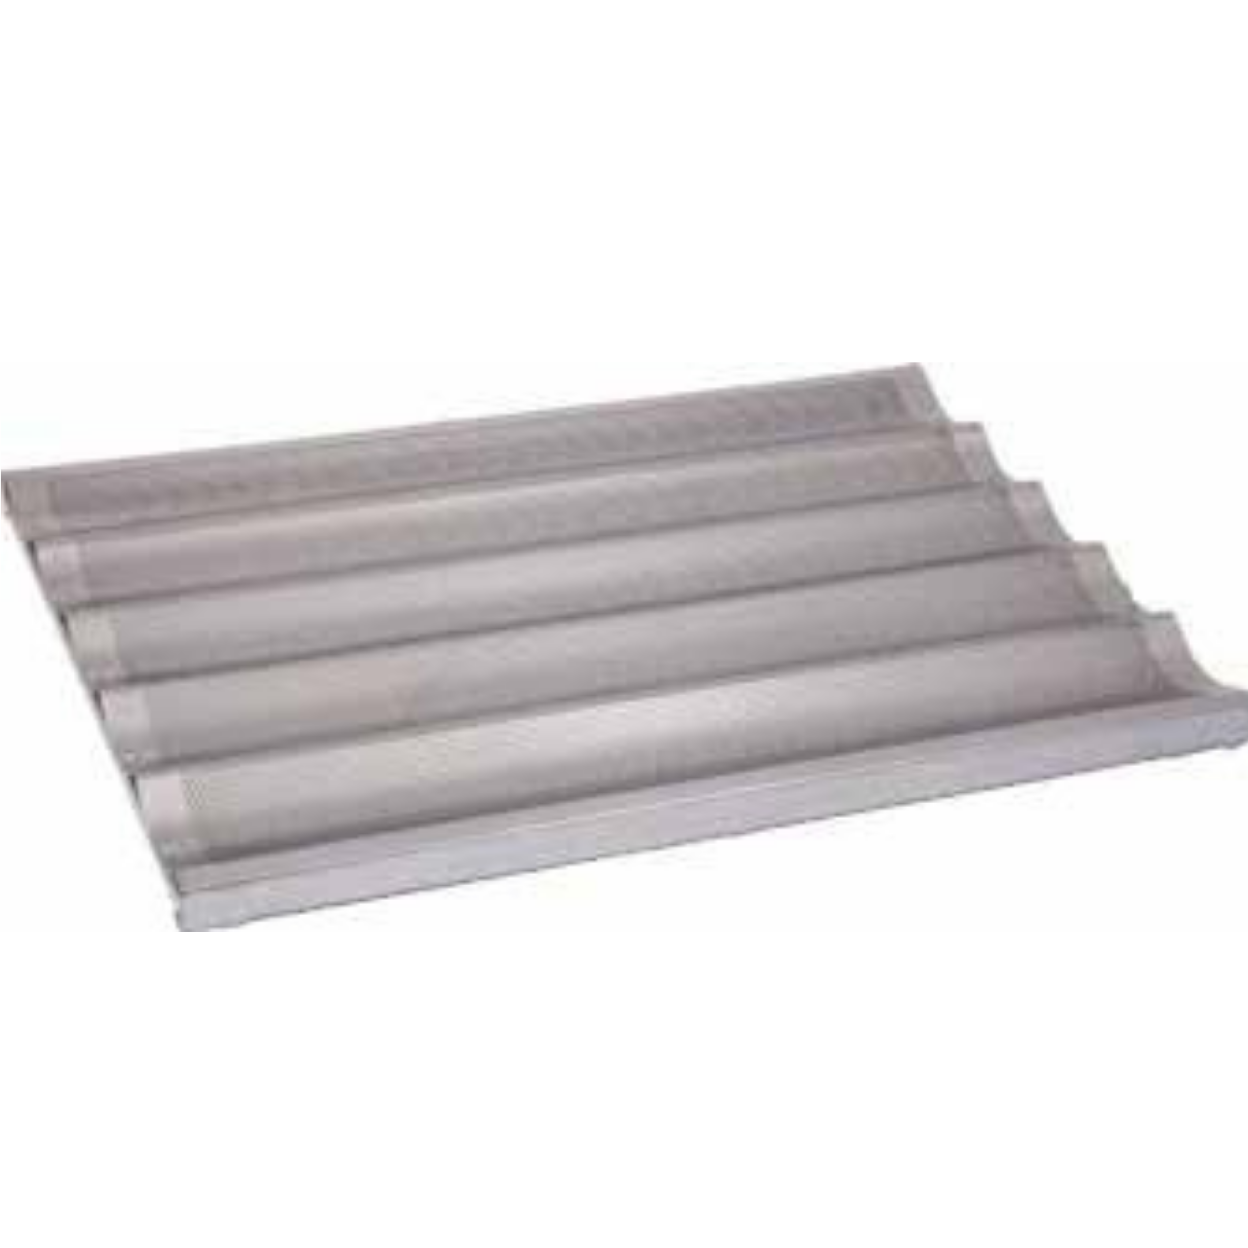 Perforated aluminum baguette tray- 4 spaces